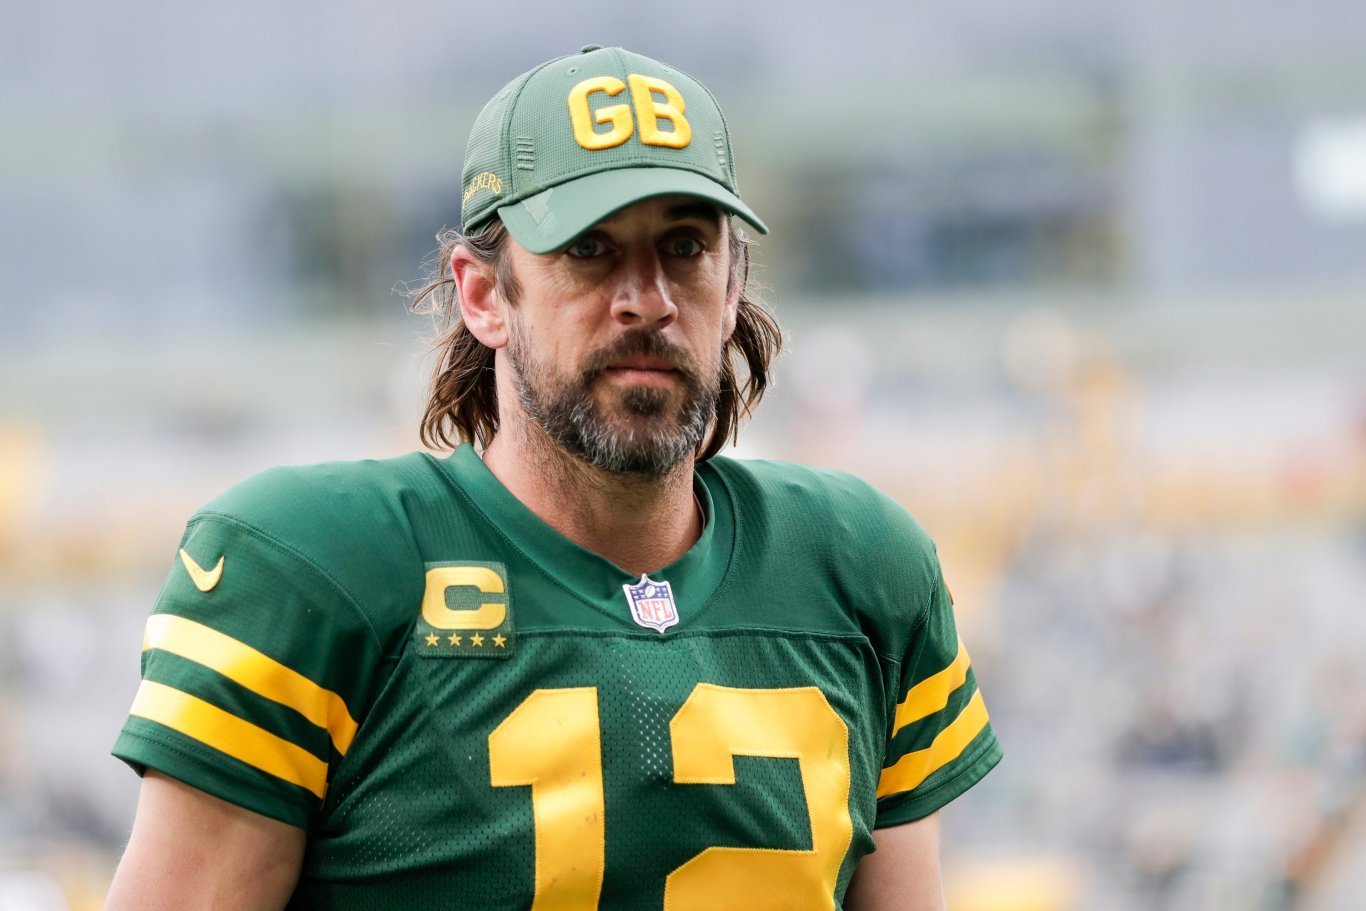 NFL Shop selling 'inverted' Green Bay Packers jersey